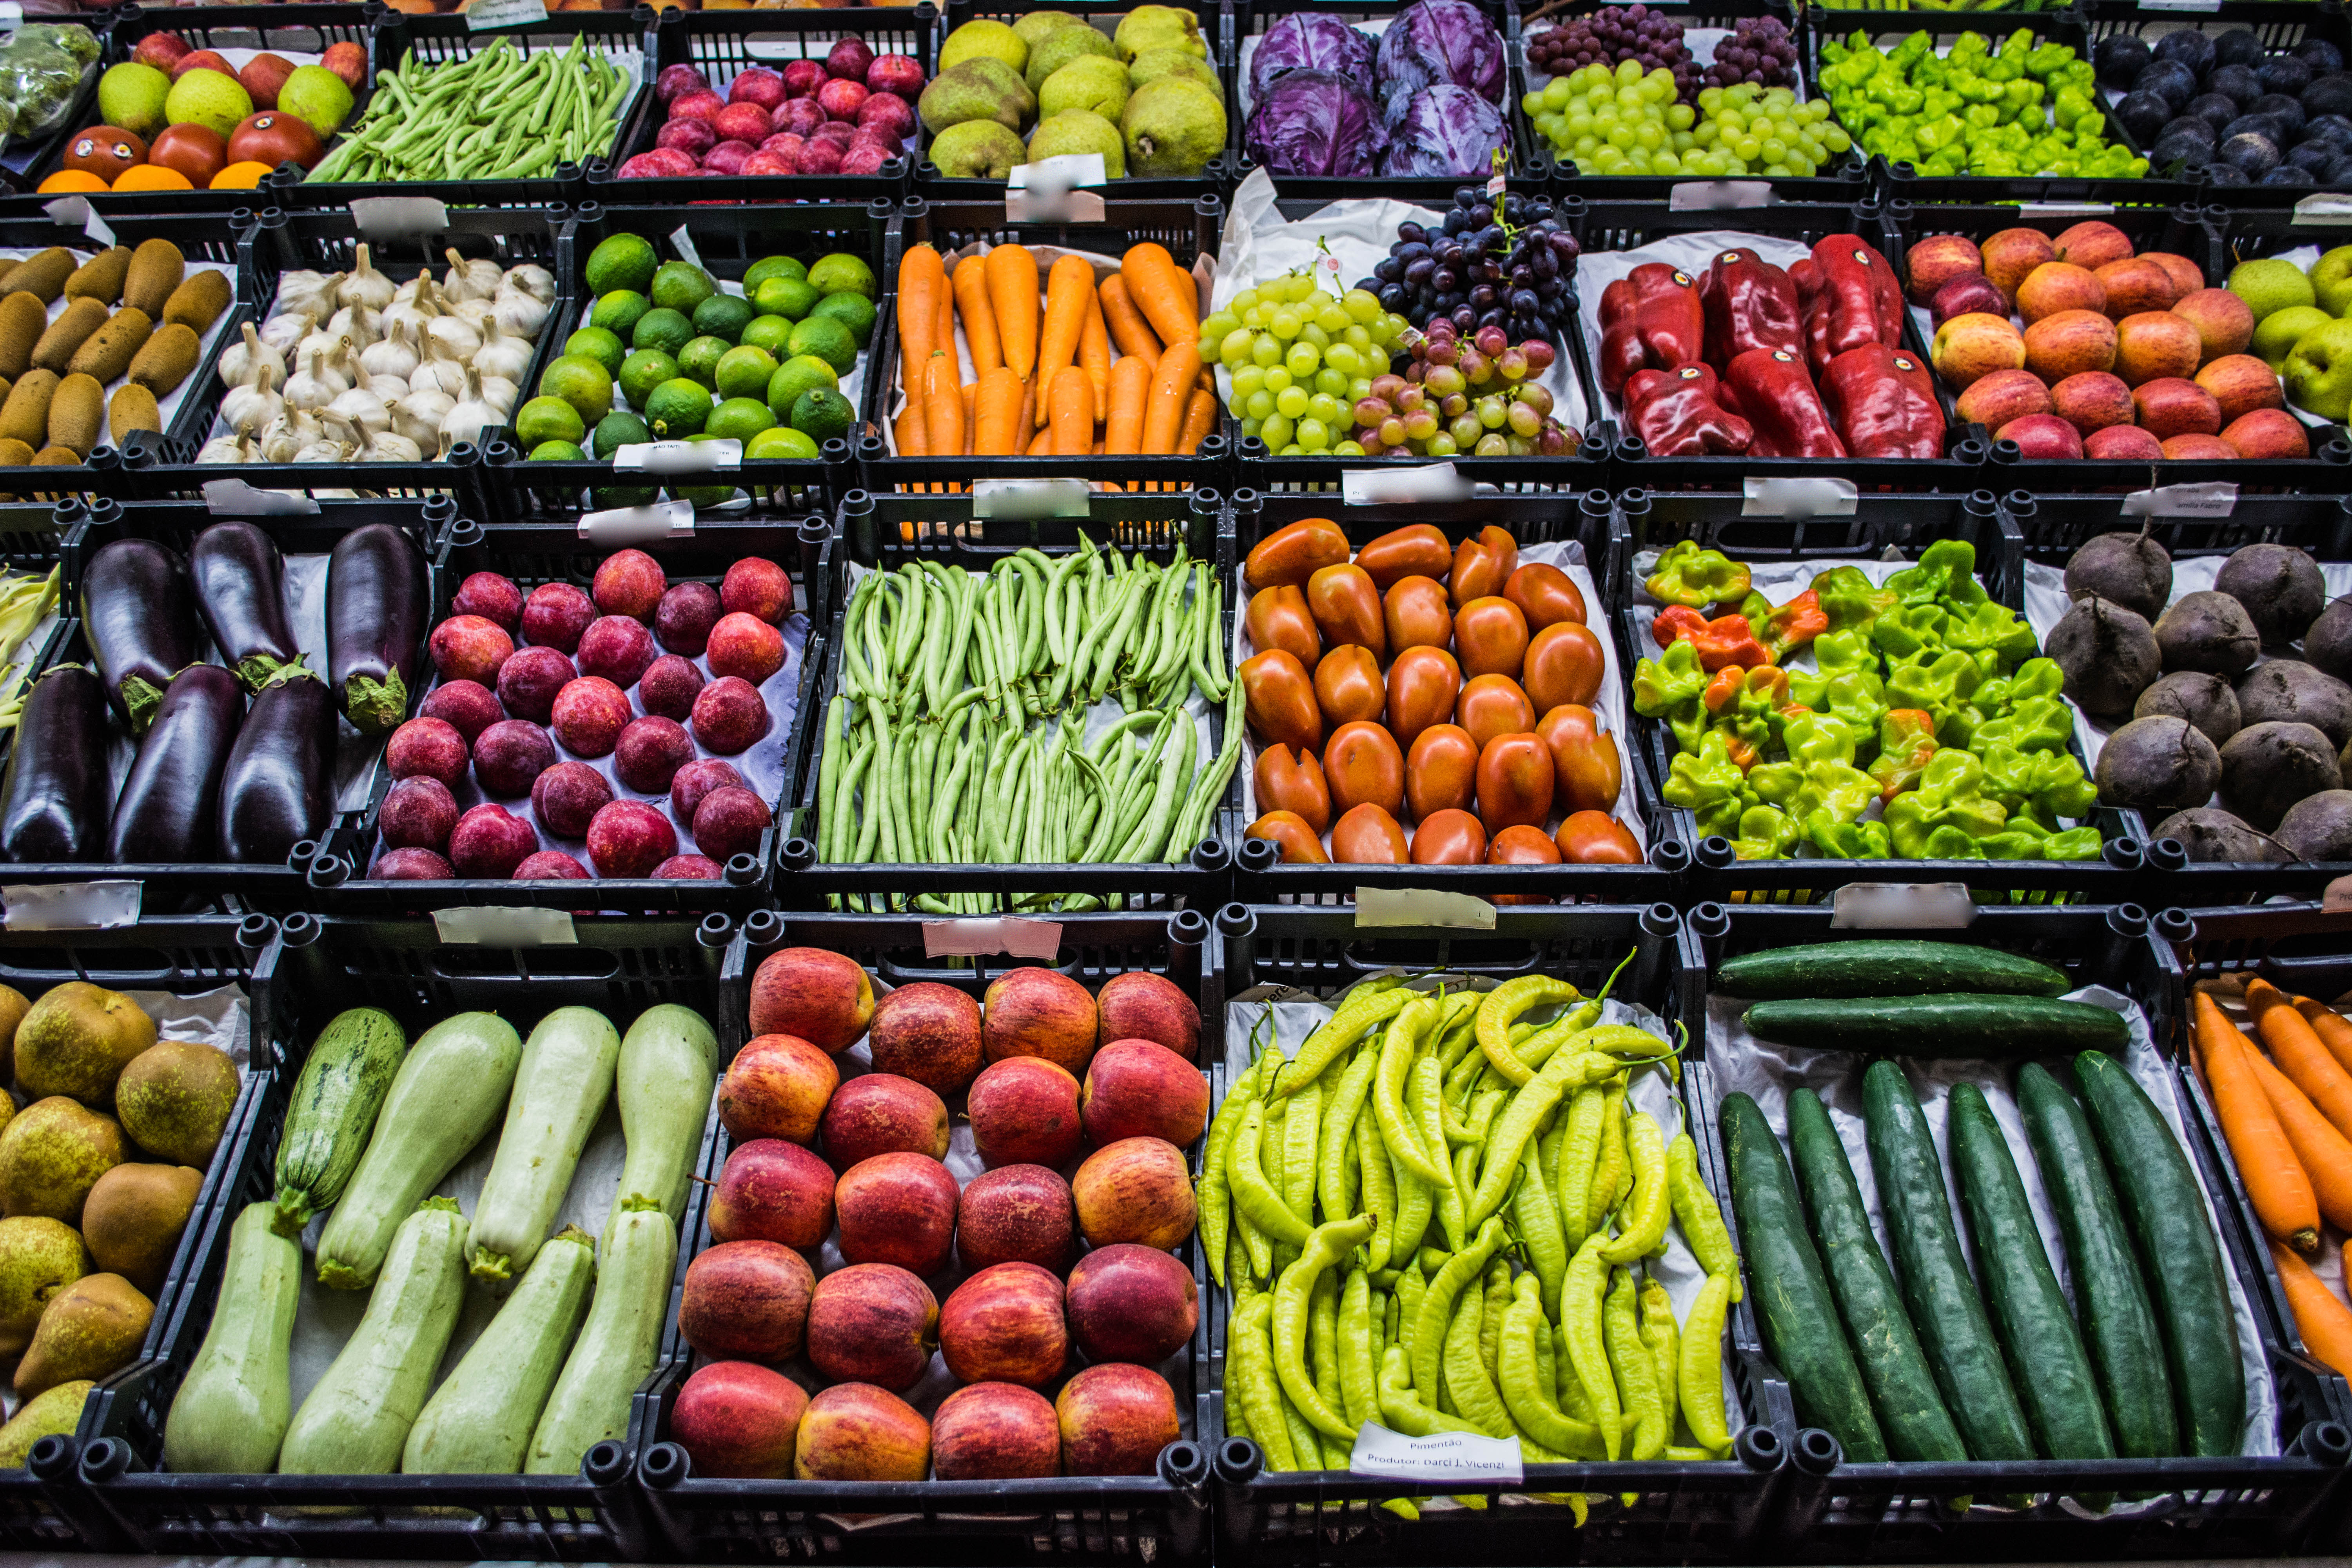 10 Grocery Stores With the Most Organic Food - Organic Grocery - Parade